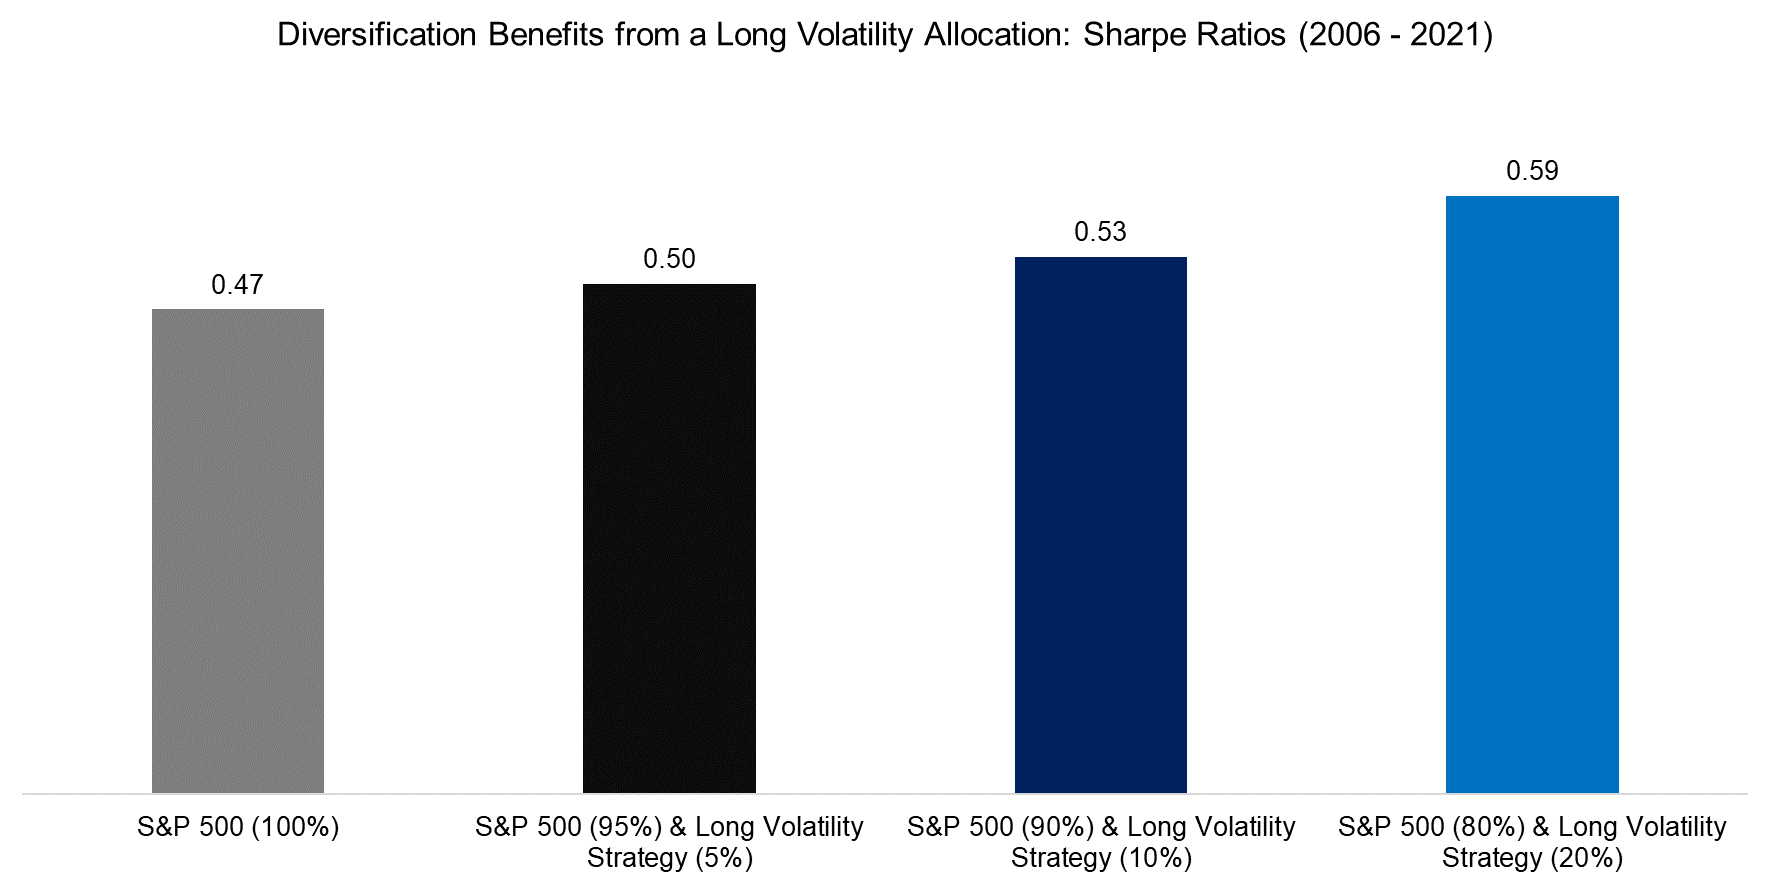 Diversification Benefits from a Long Volatility Allocation Sharpe Ratios (2006 - 2021